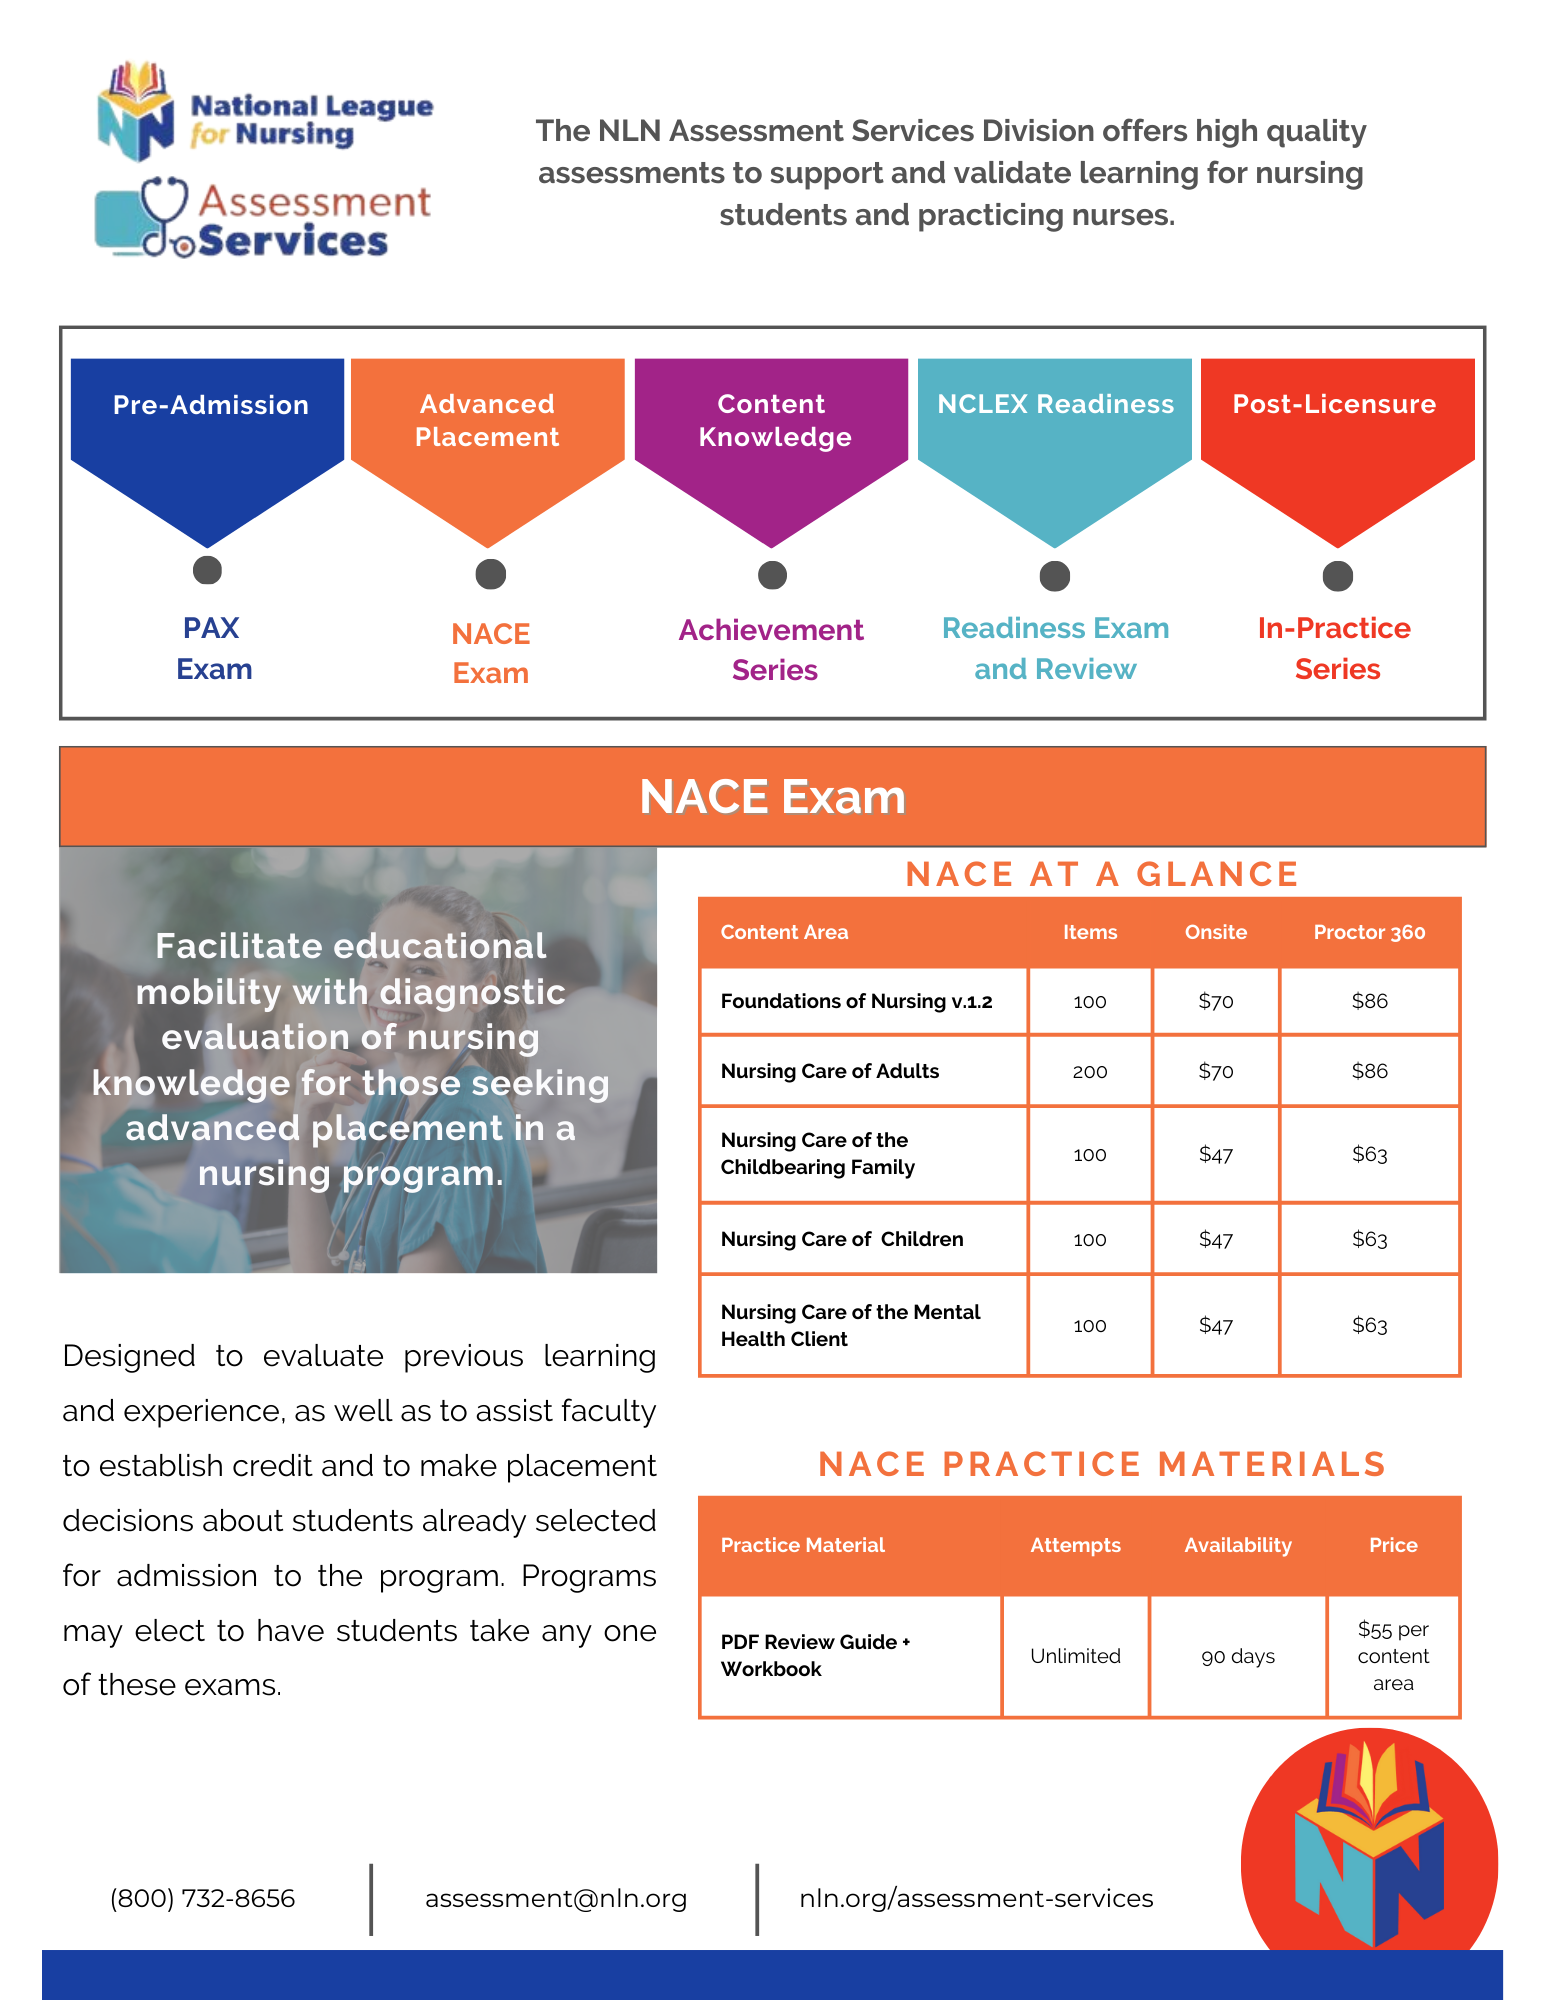 Colorful brochure with price and item details for the NACE Exam